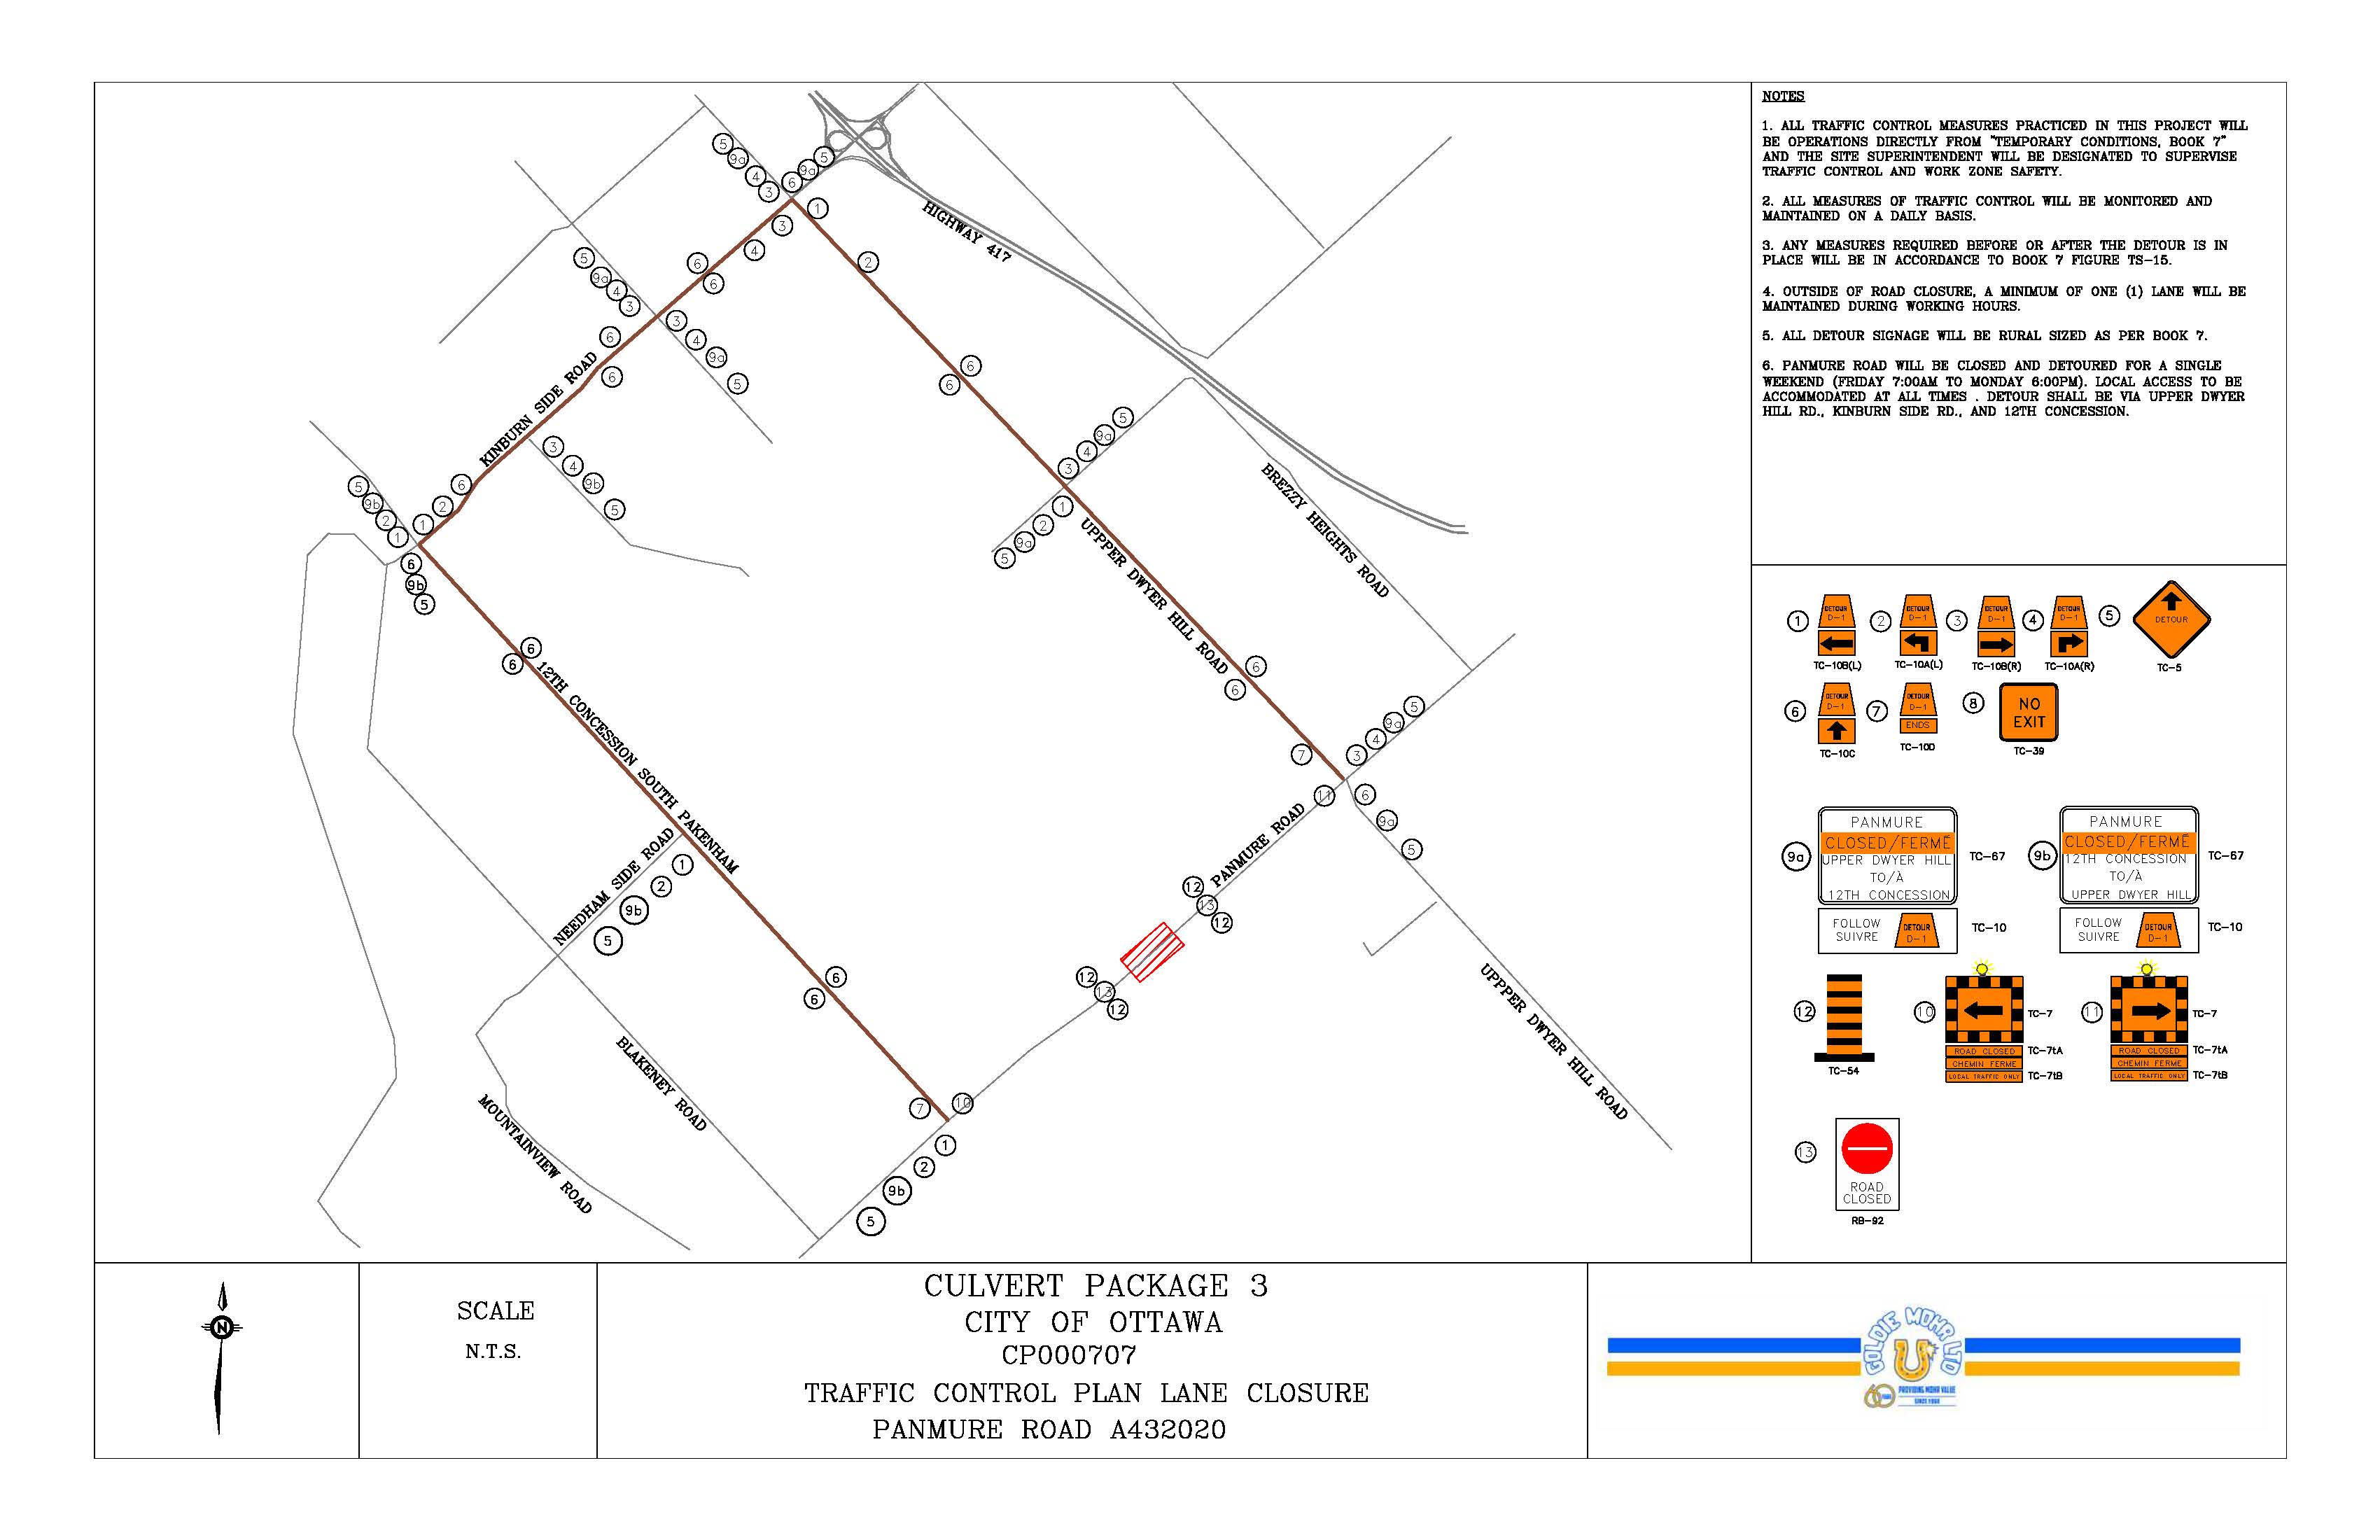 Map showing Panmure Road closures for culvert replacement